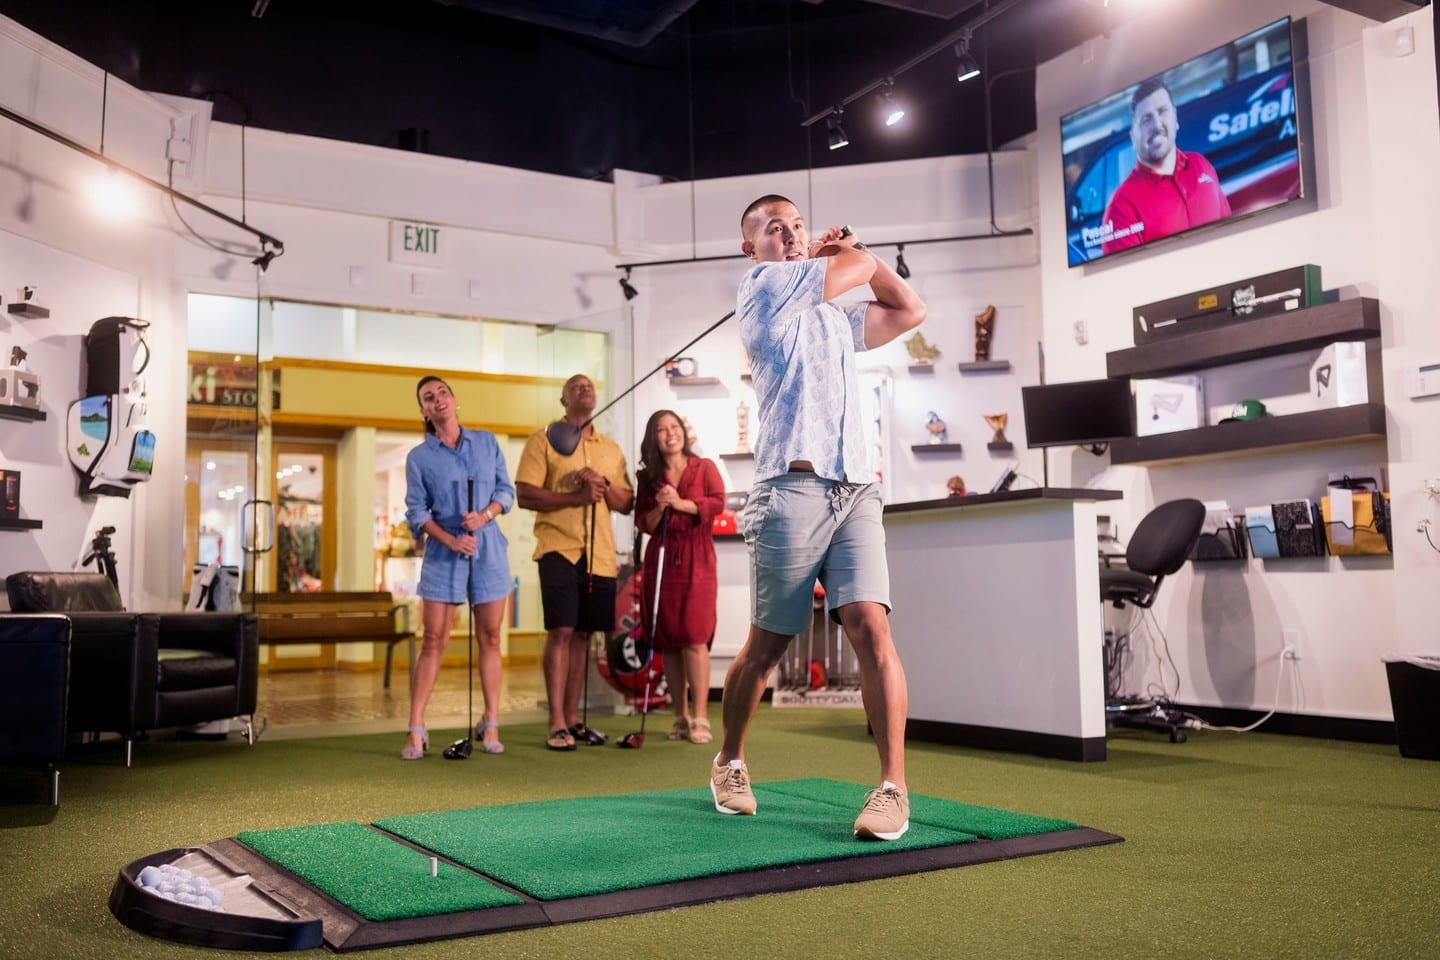 Happy National Golf Lovers Day! Swing into celebration with a round of golf at some of the most famous courses in the world from right here in Honolulu at @thegolfsimhi in Ward Centre, powered by @rogerdunngolfhawaii!